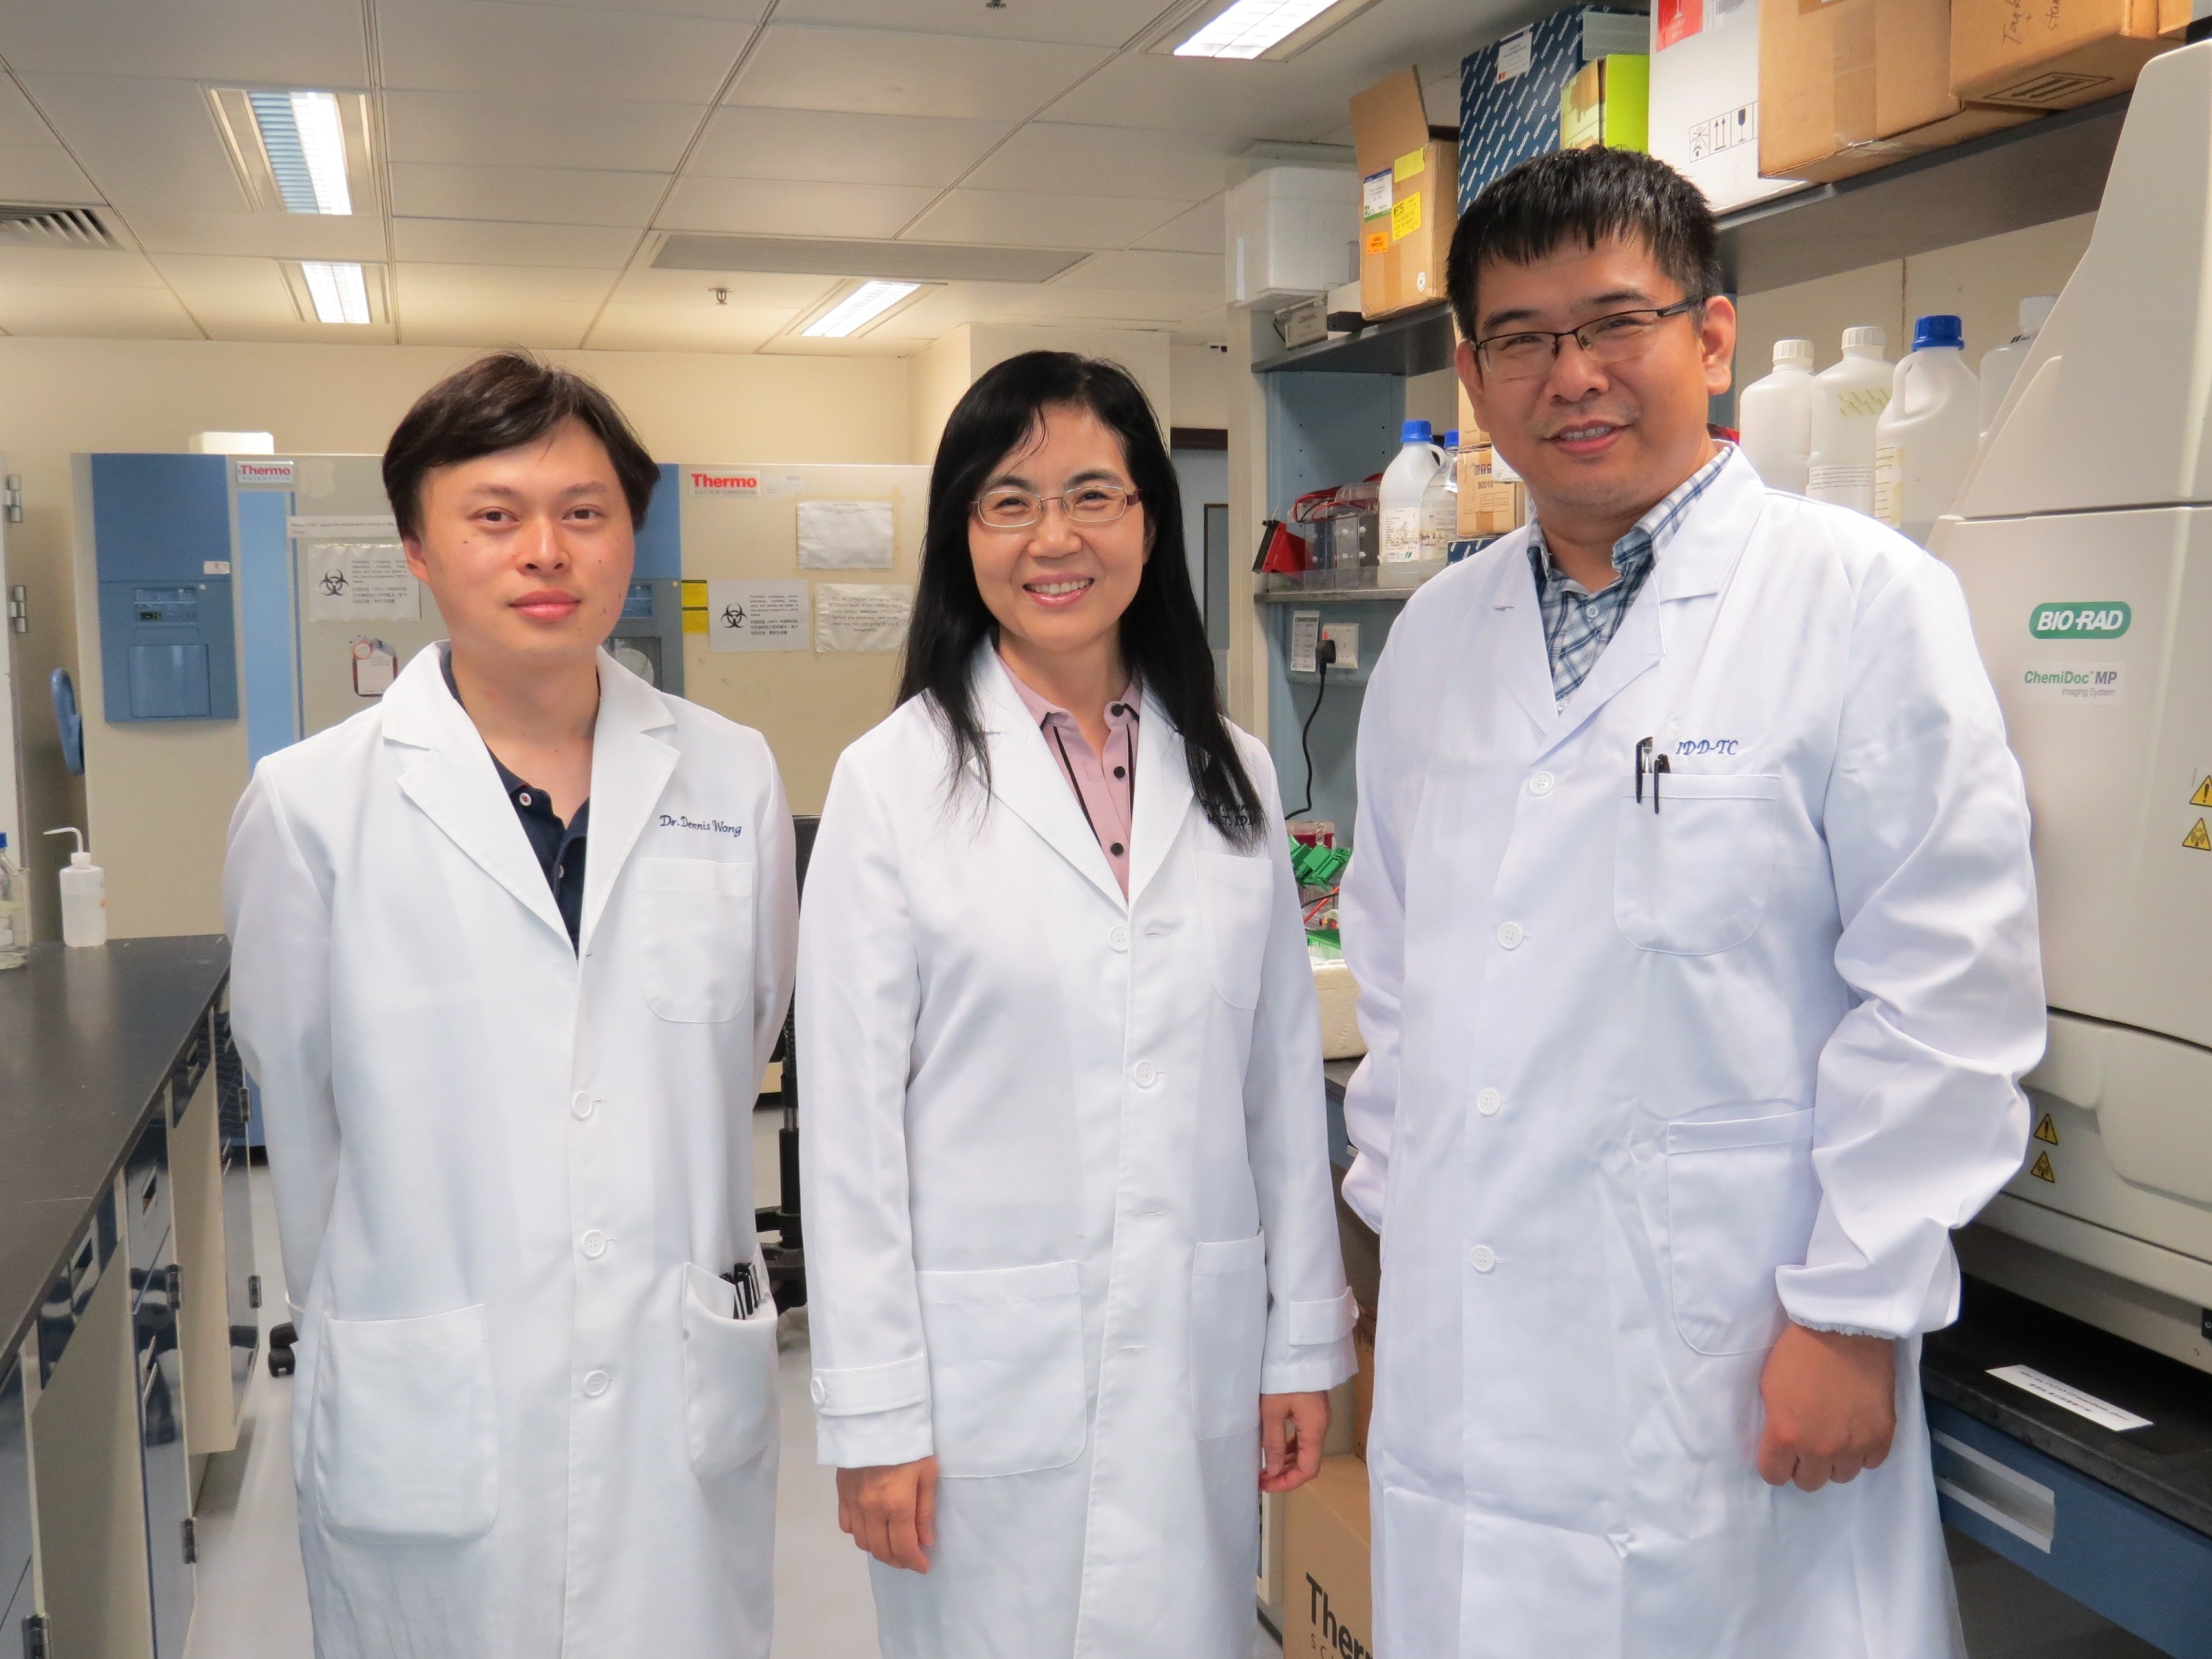 Professor Jun YU (centre), Department of Medicine and Therapeutics, Faculty of Medicine at CUHK, first discovered the role of SQLE as an oncogene in NAFLD-HCC. Team members of this study include Dr. Dabin LIU (right) and Dr. Chi Chun WONG.